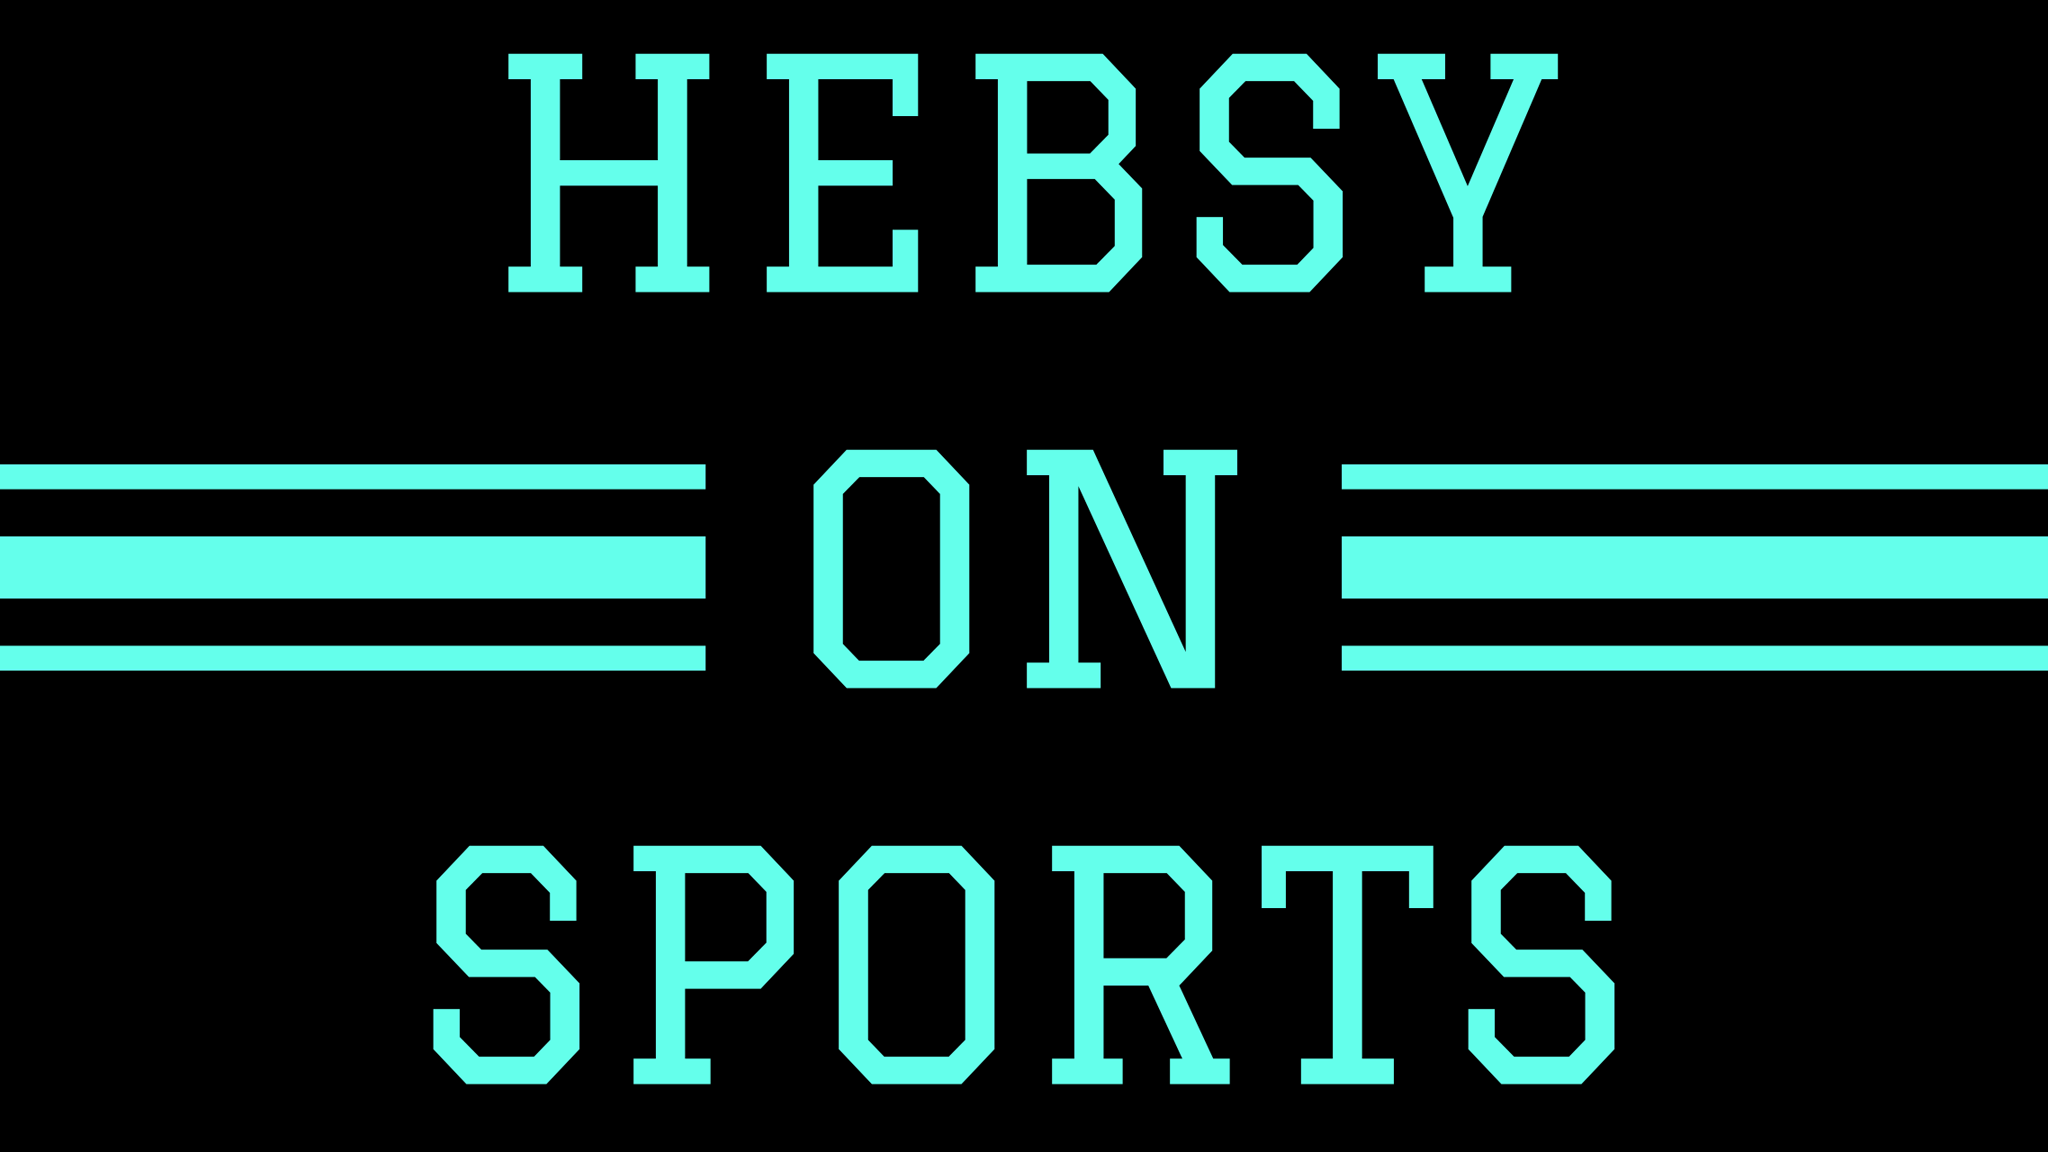 Hebsy on Sports for October 8, 2021